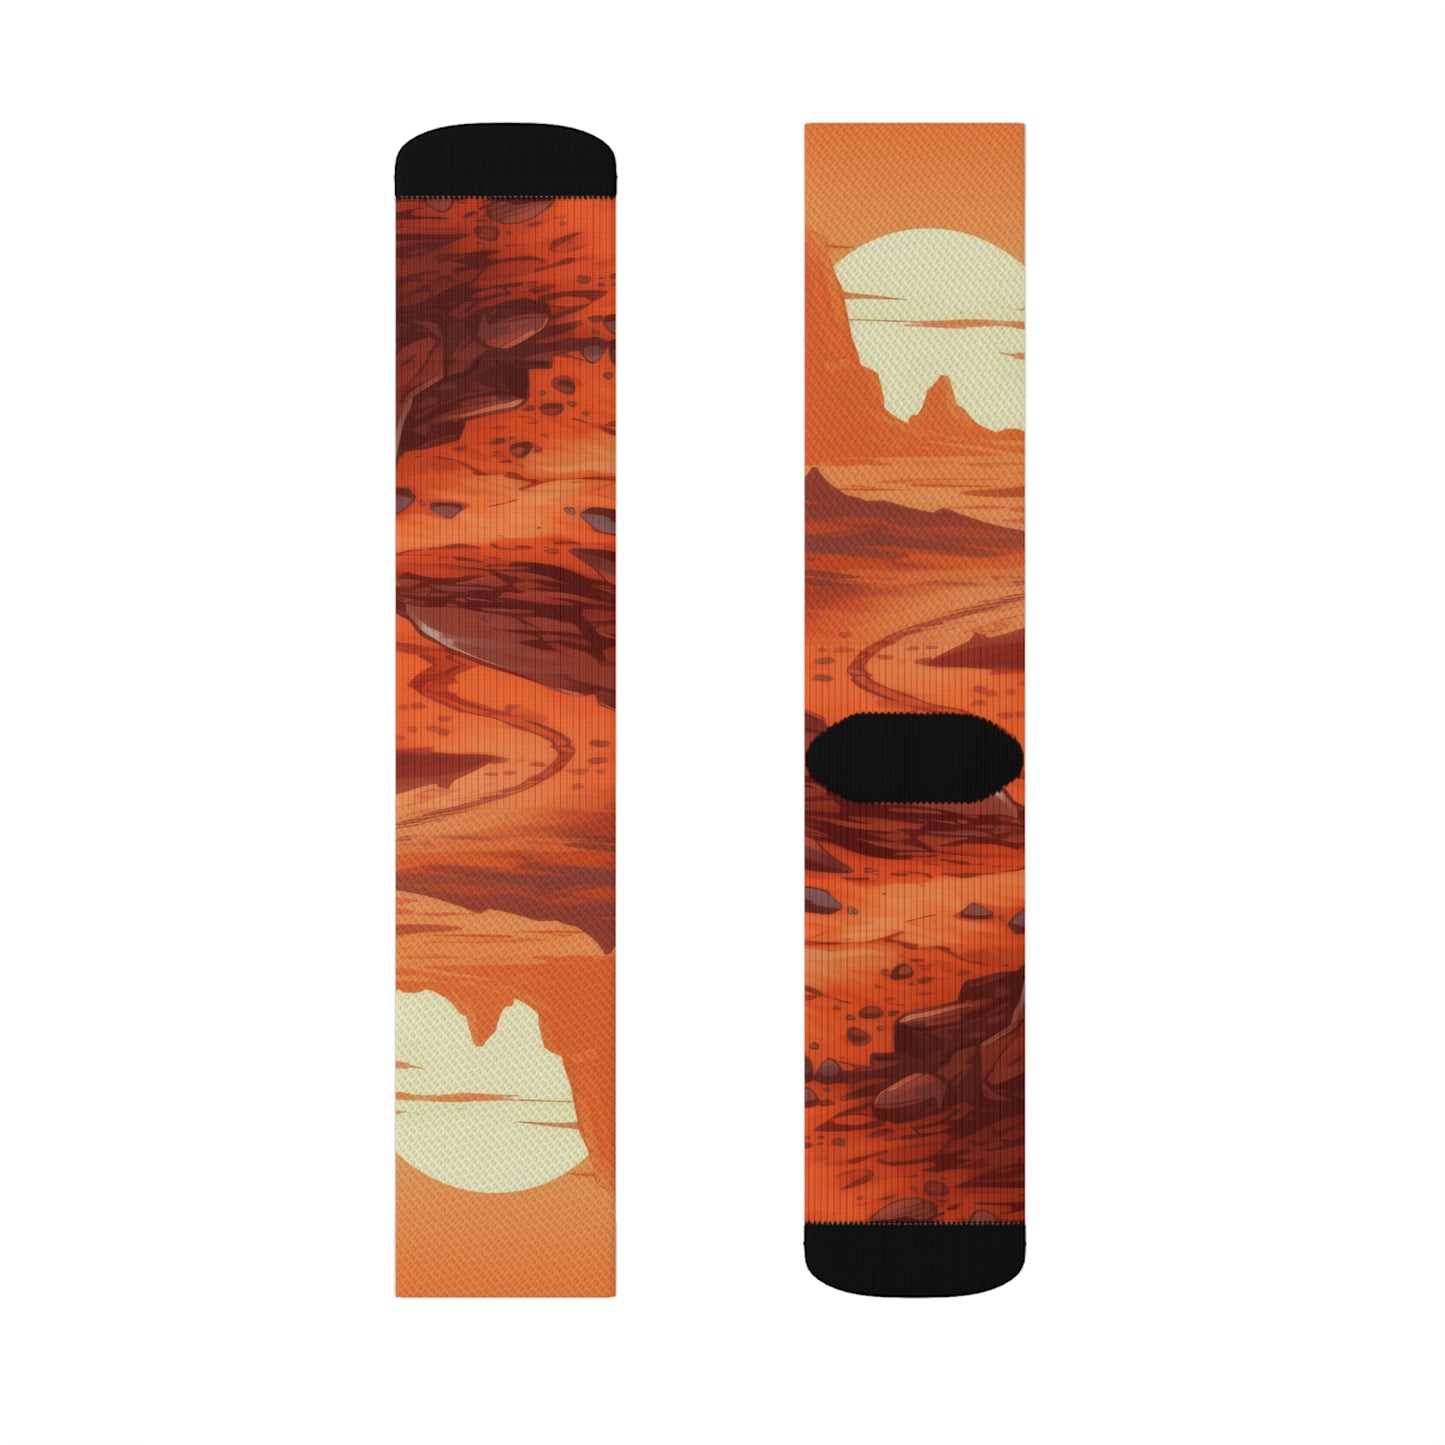 Aliens and UFOs Design, Abstract Art, Space, Mars, Socks